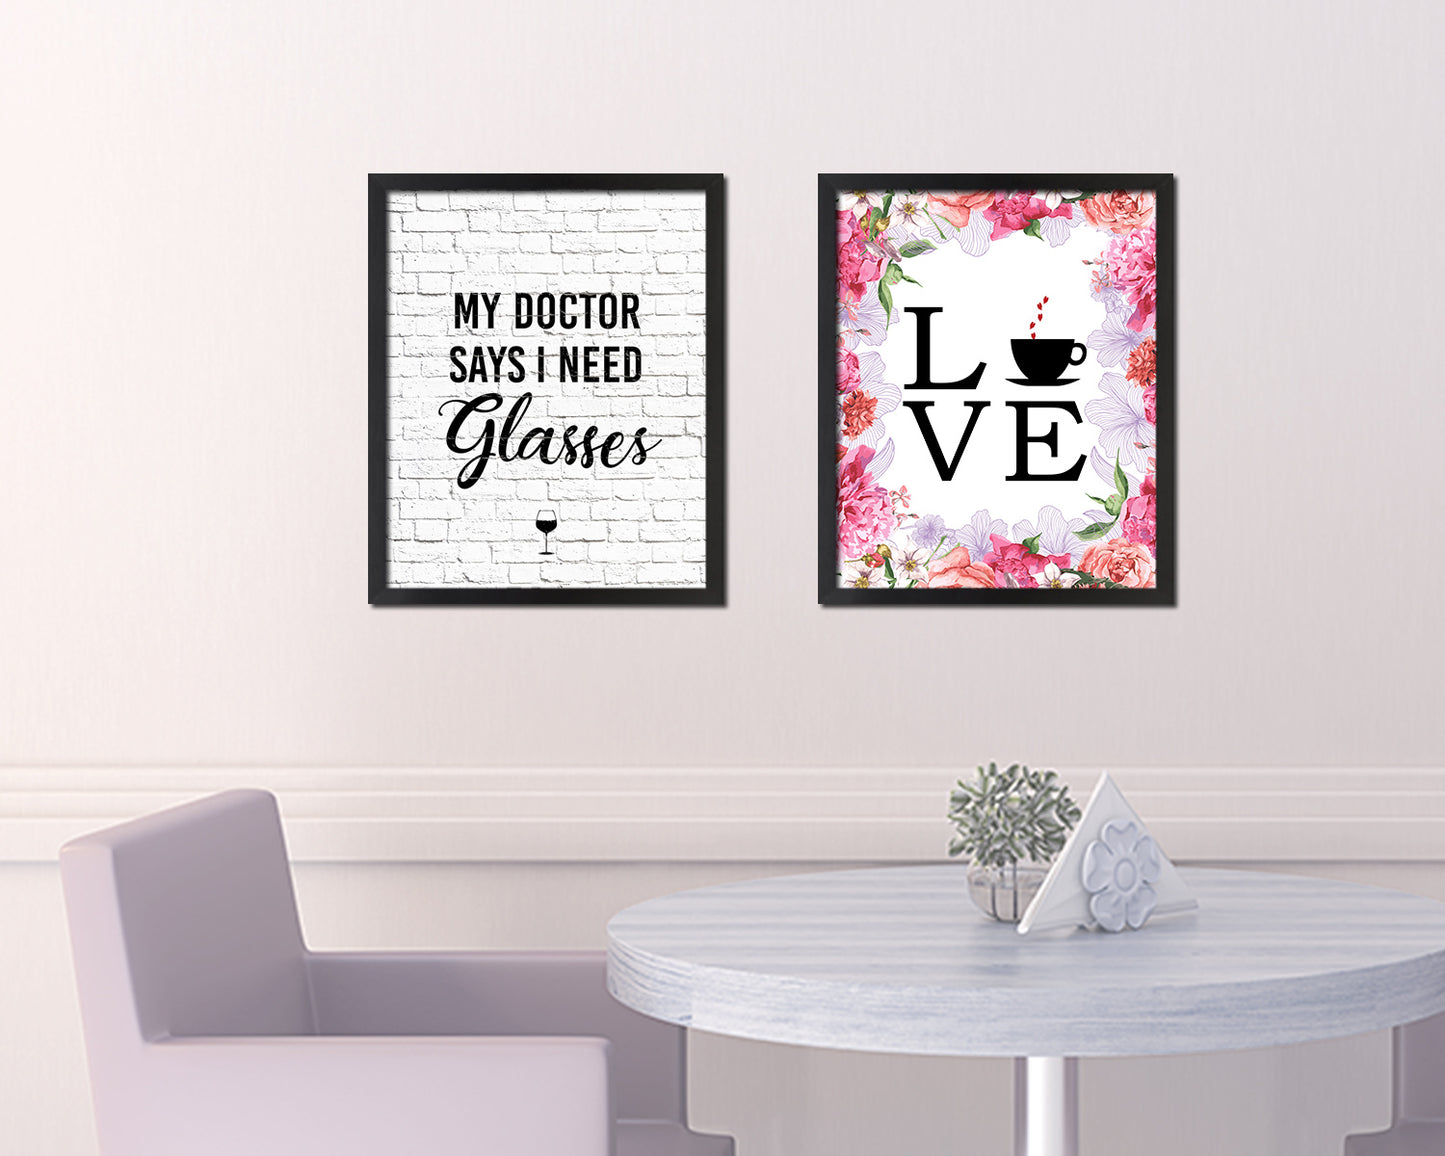 My doctor says I need glasses Words Wood Framed Print Wall Decor Art Gifts